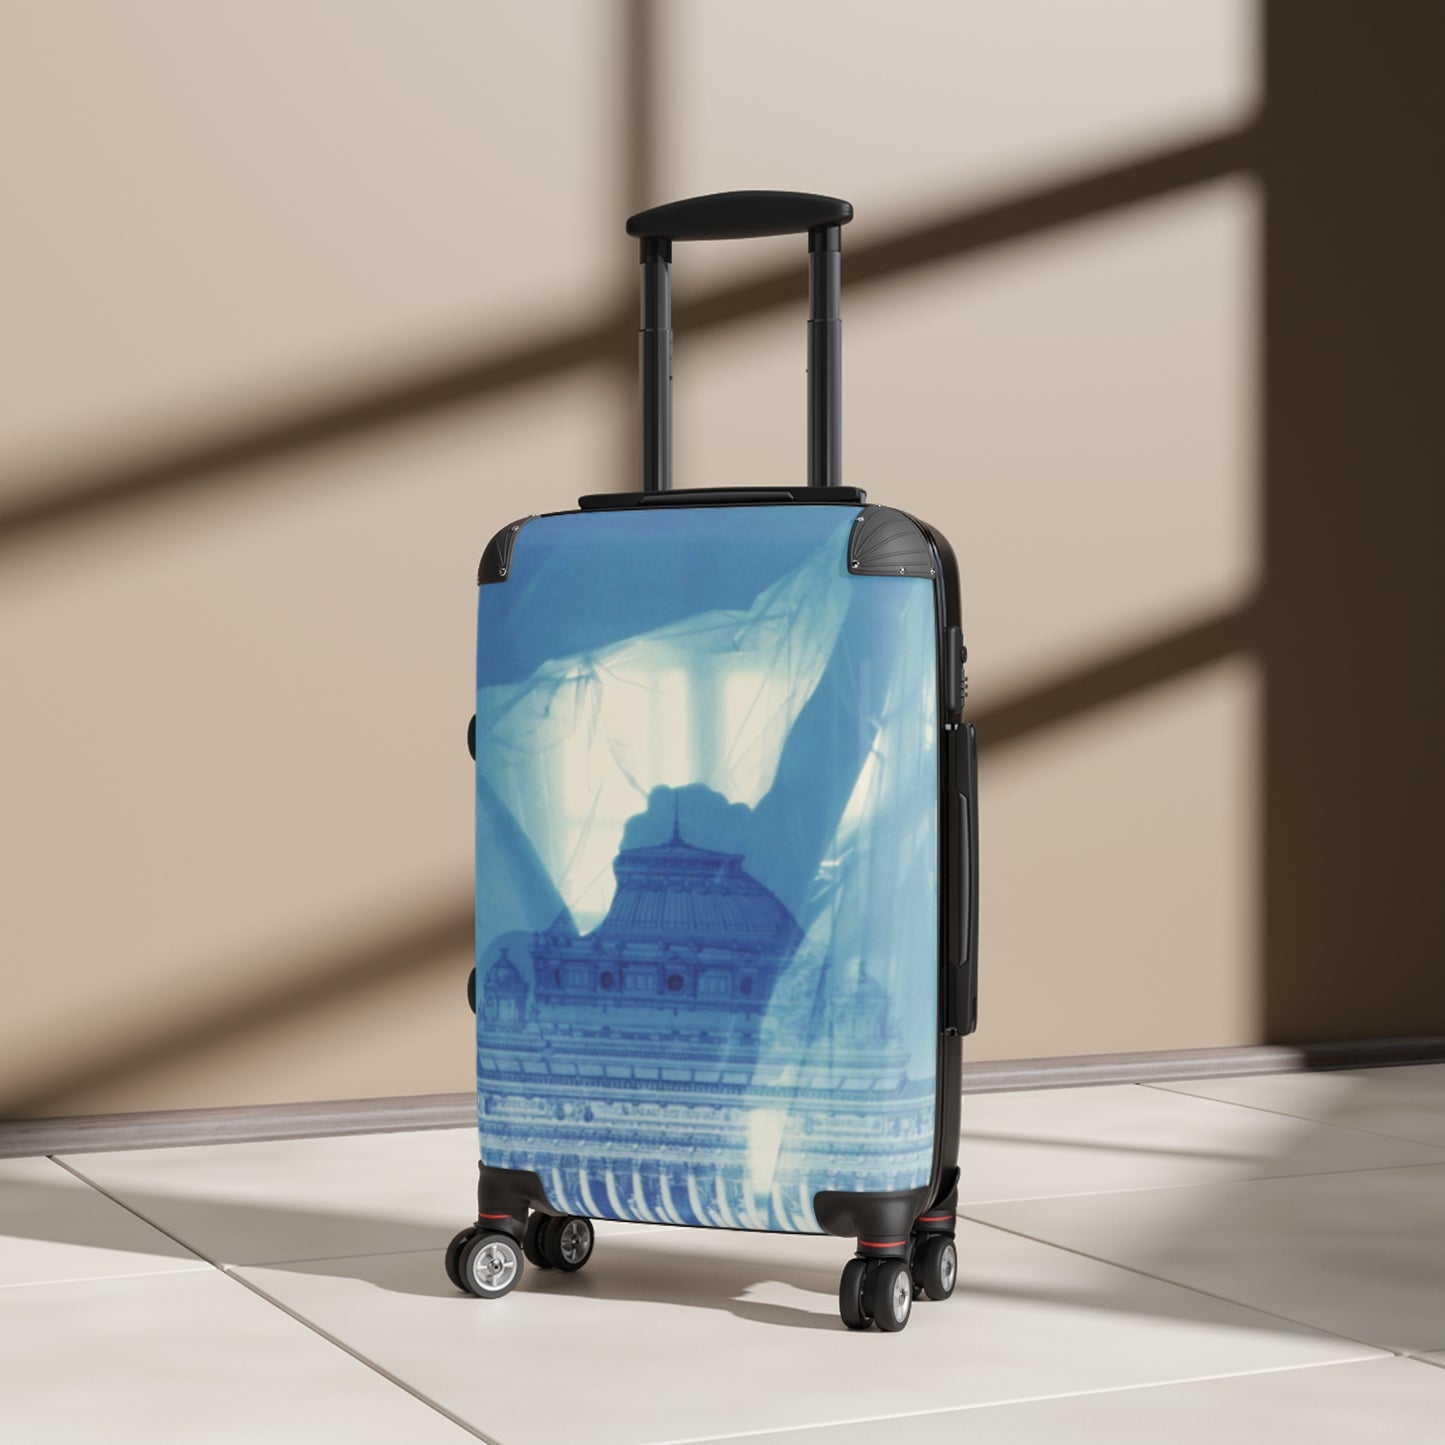 The Ideal City Luggage